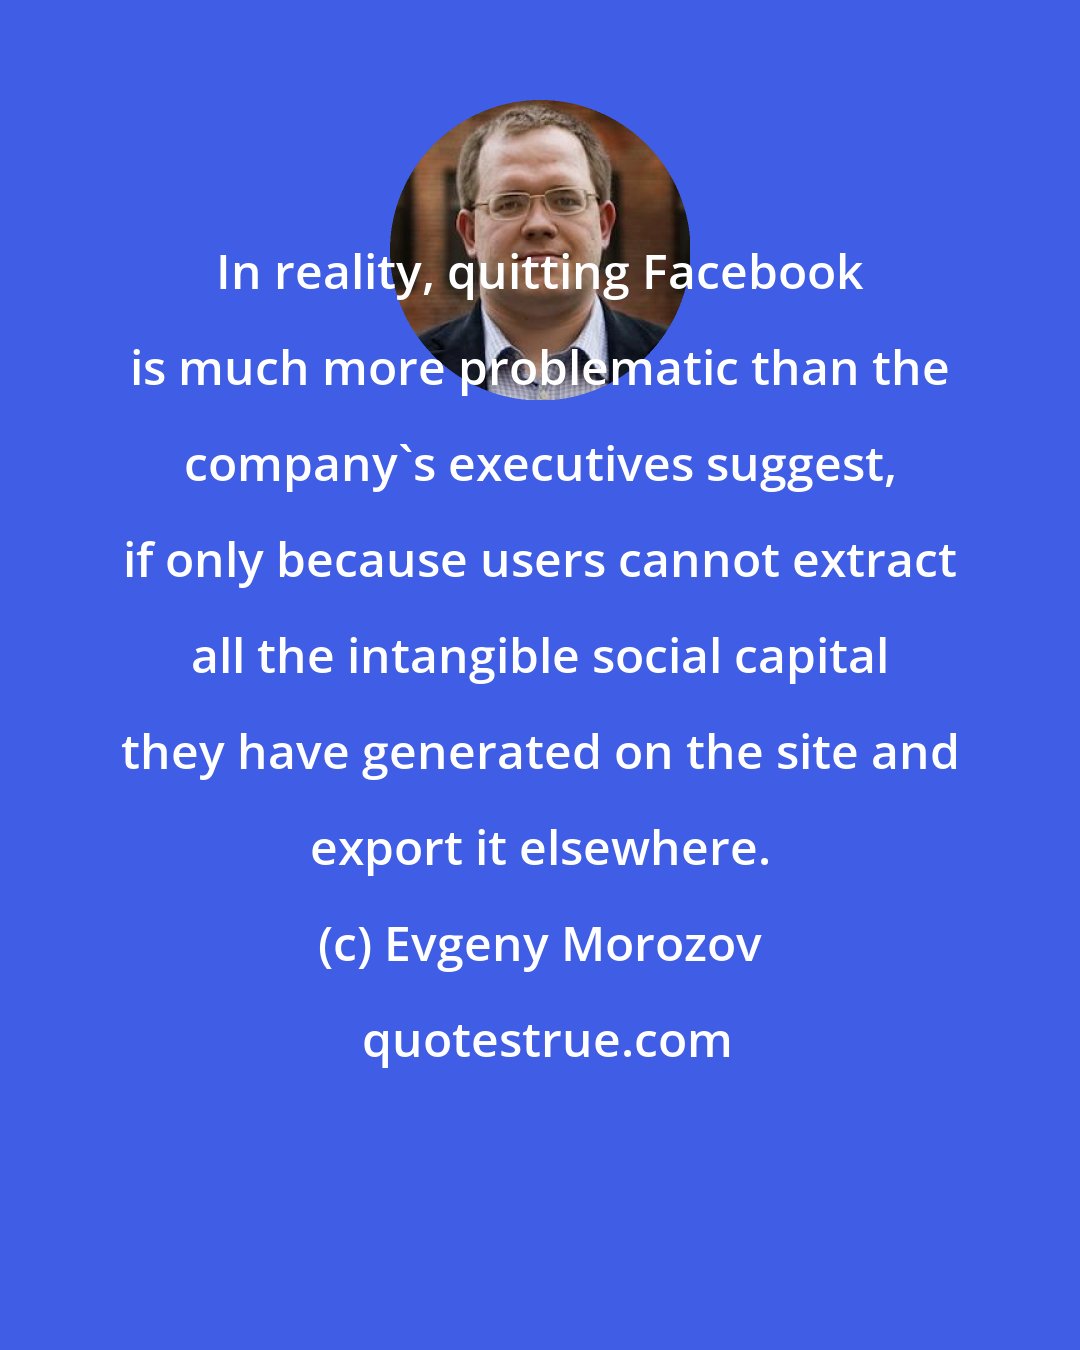 Evgeny Morozov: In reality, quitting Facebook is much more problematic than the company's executives suggest, if only because users cannot extract all the intangible social capital they have generated on the site and export it elsewhere.